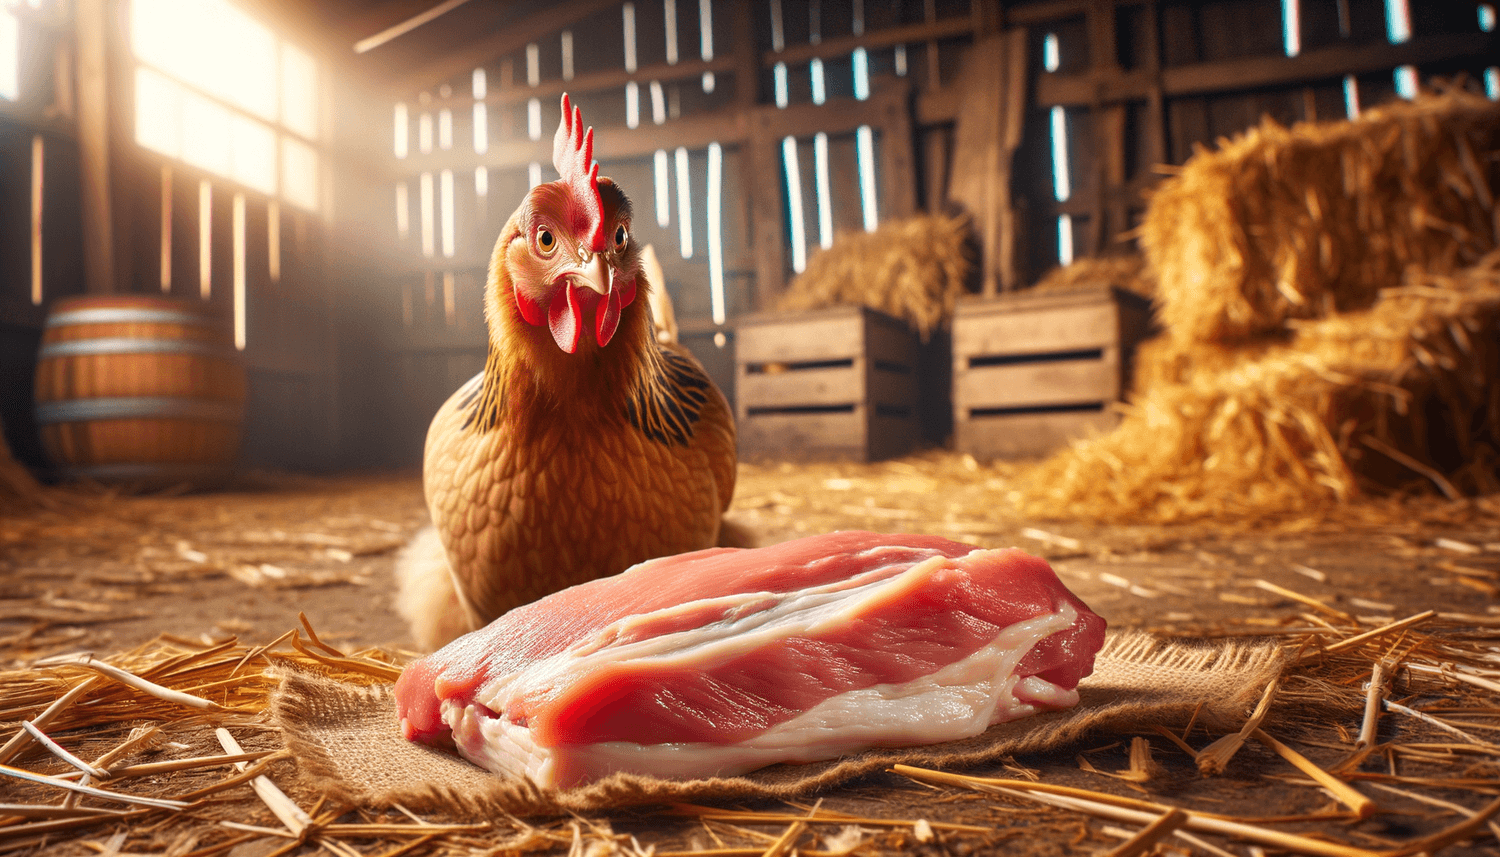 Can Chickens Eat Raw Pork?